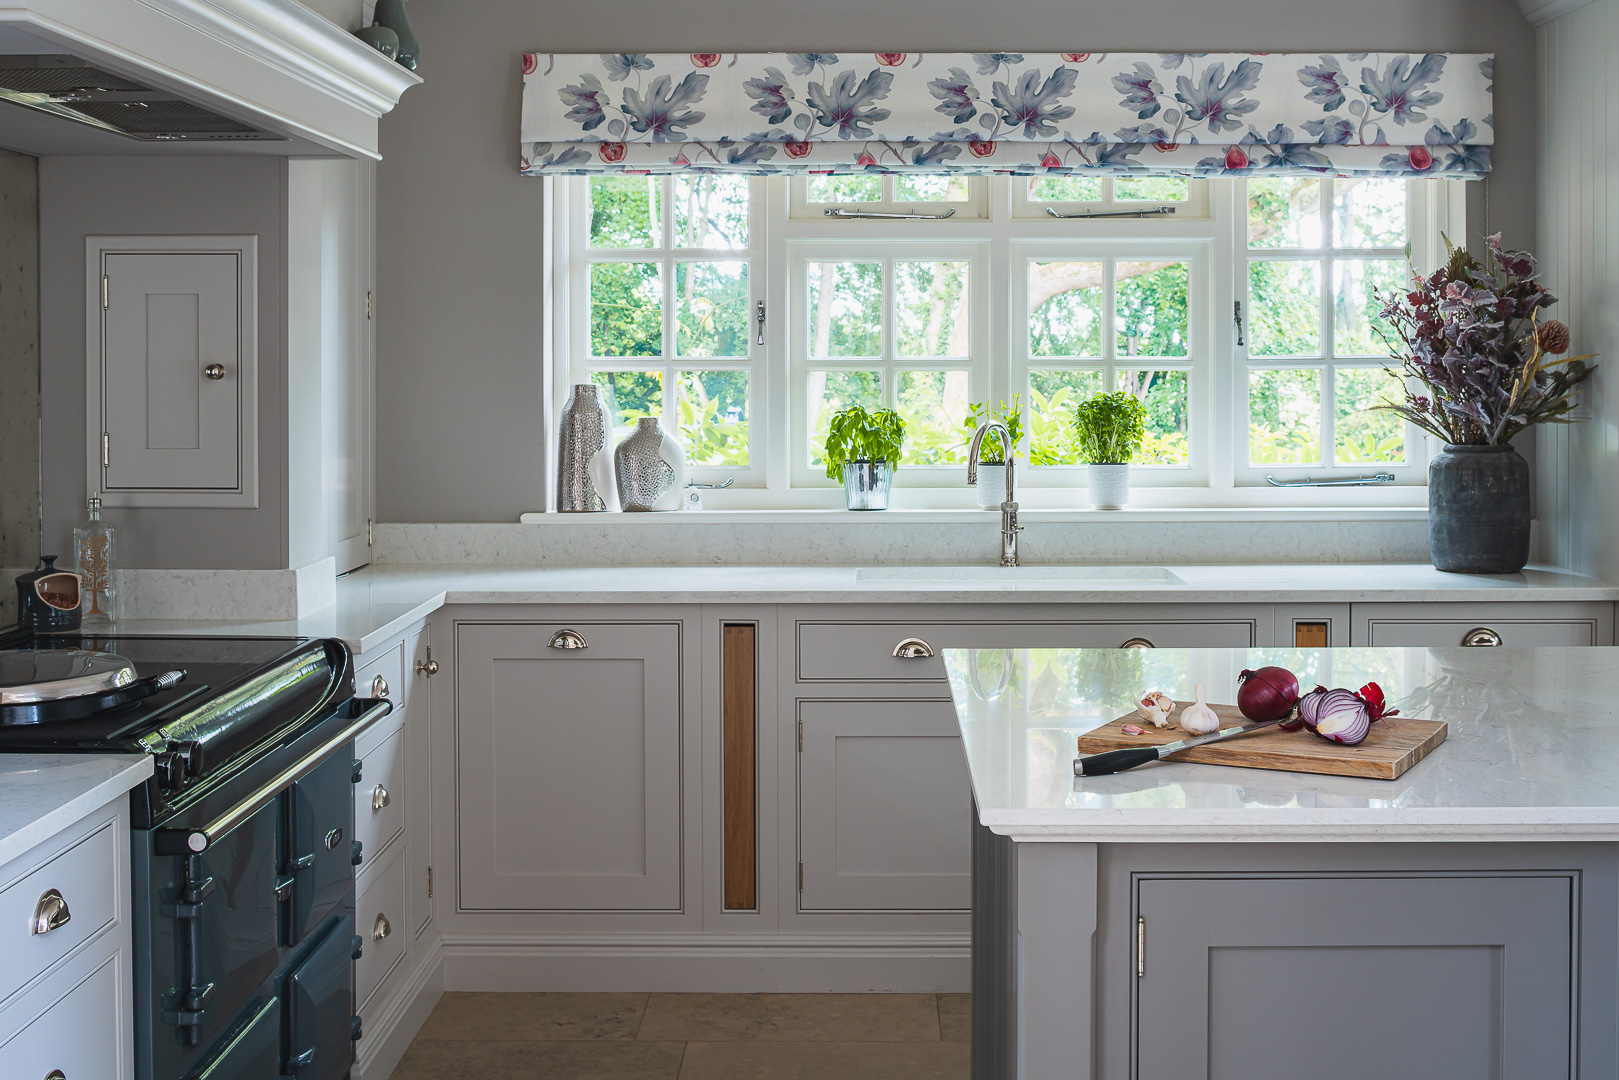 Shaker style Kitchen with Aga in a grey and plum colour scheme.